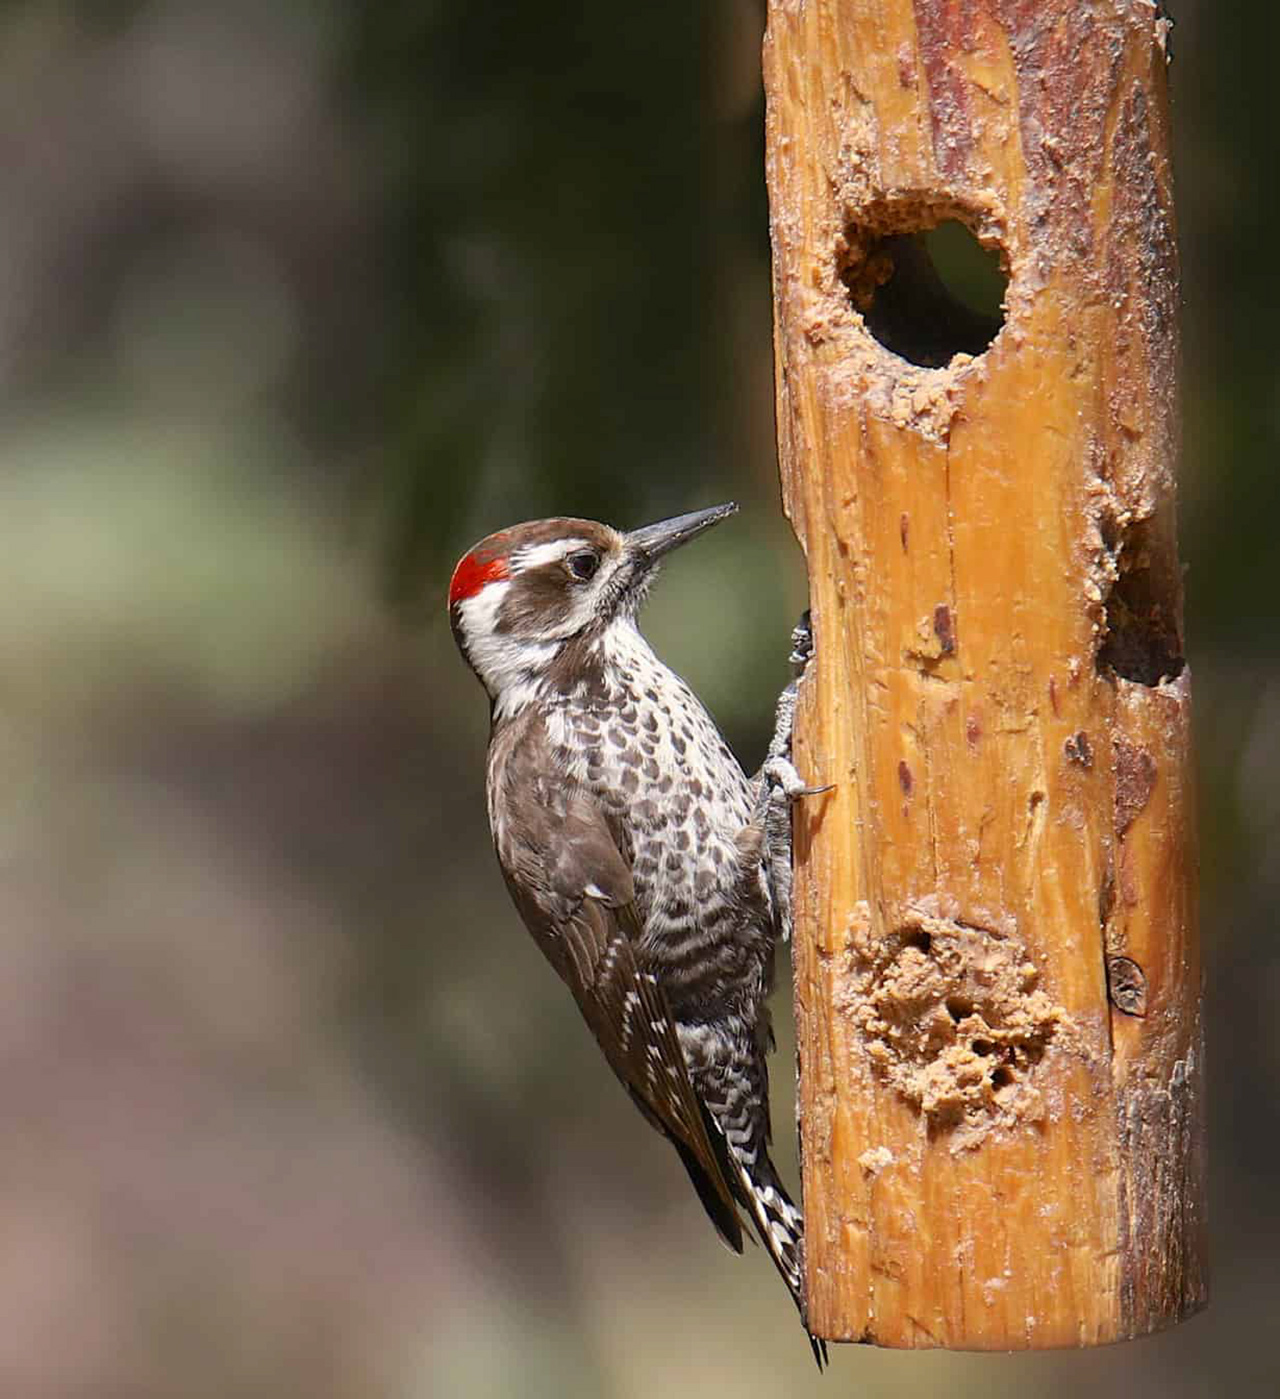 In which trees do woodpeckers live?